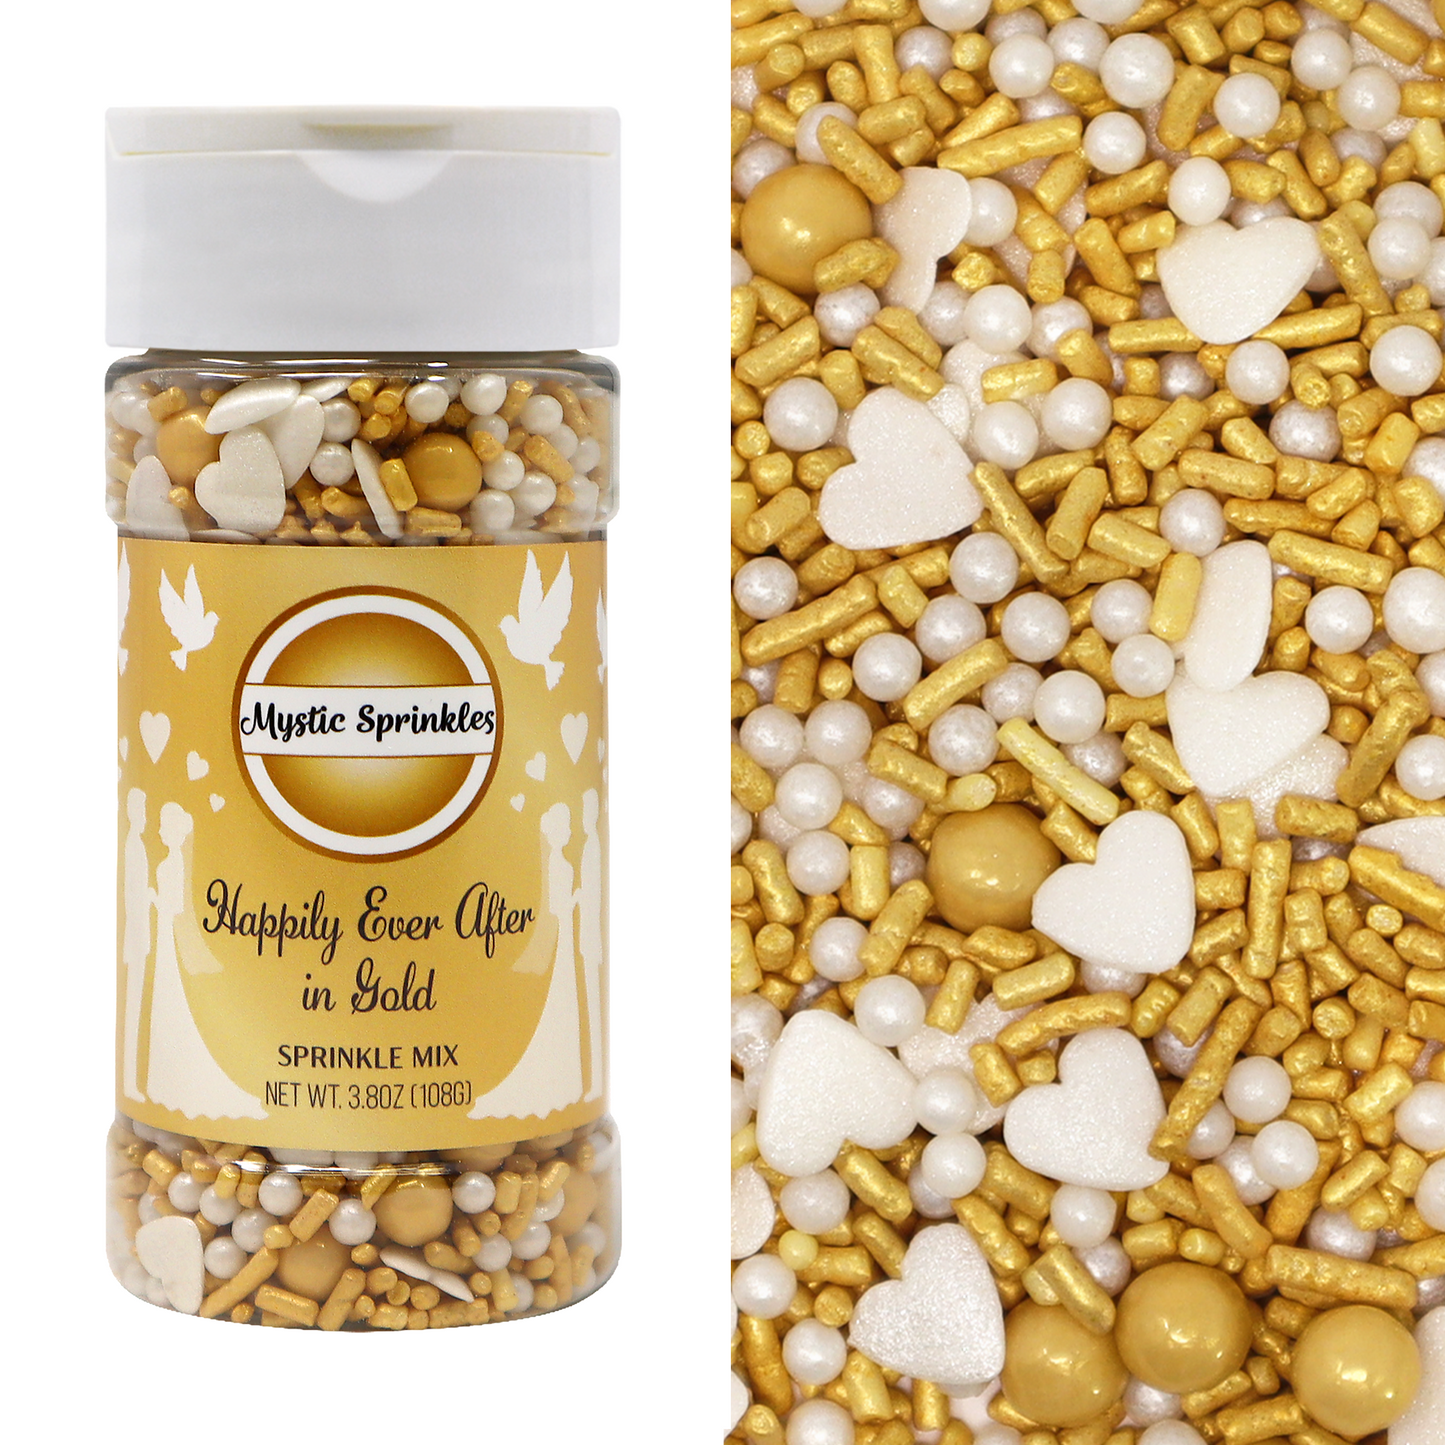 Happily Ever After in Gold Sprinkle Mix 3.6oz